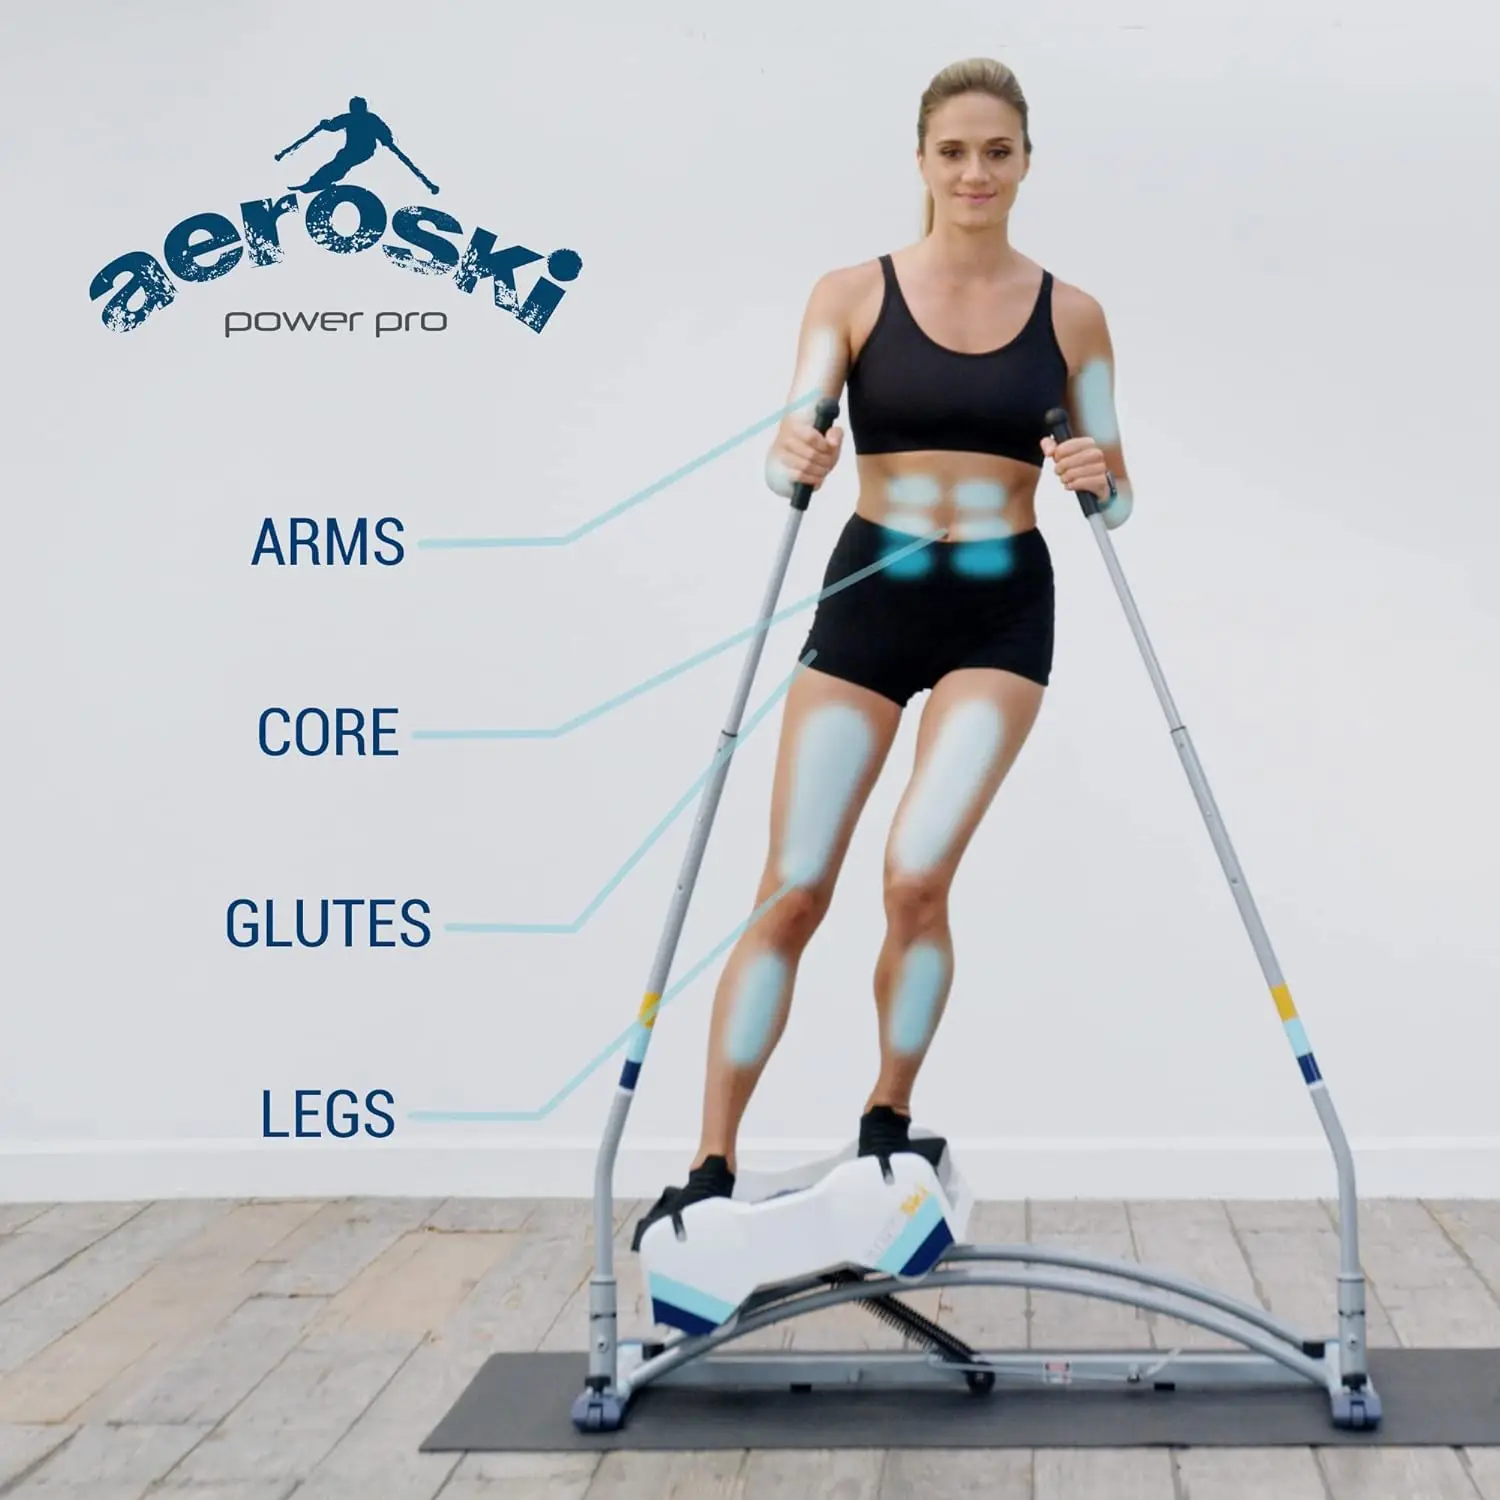 Aeroski Reviews: Is the Exercise Machine Worth Your Money?